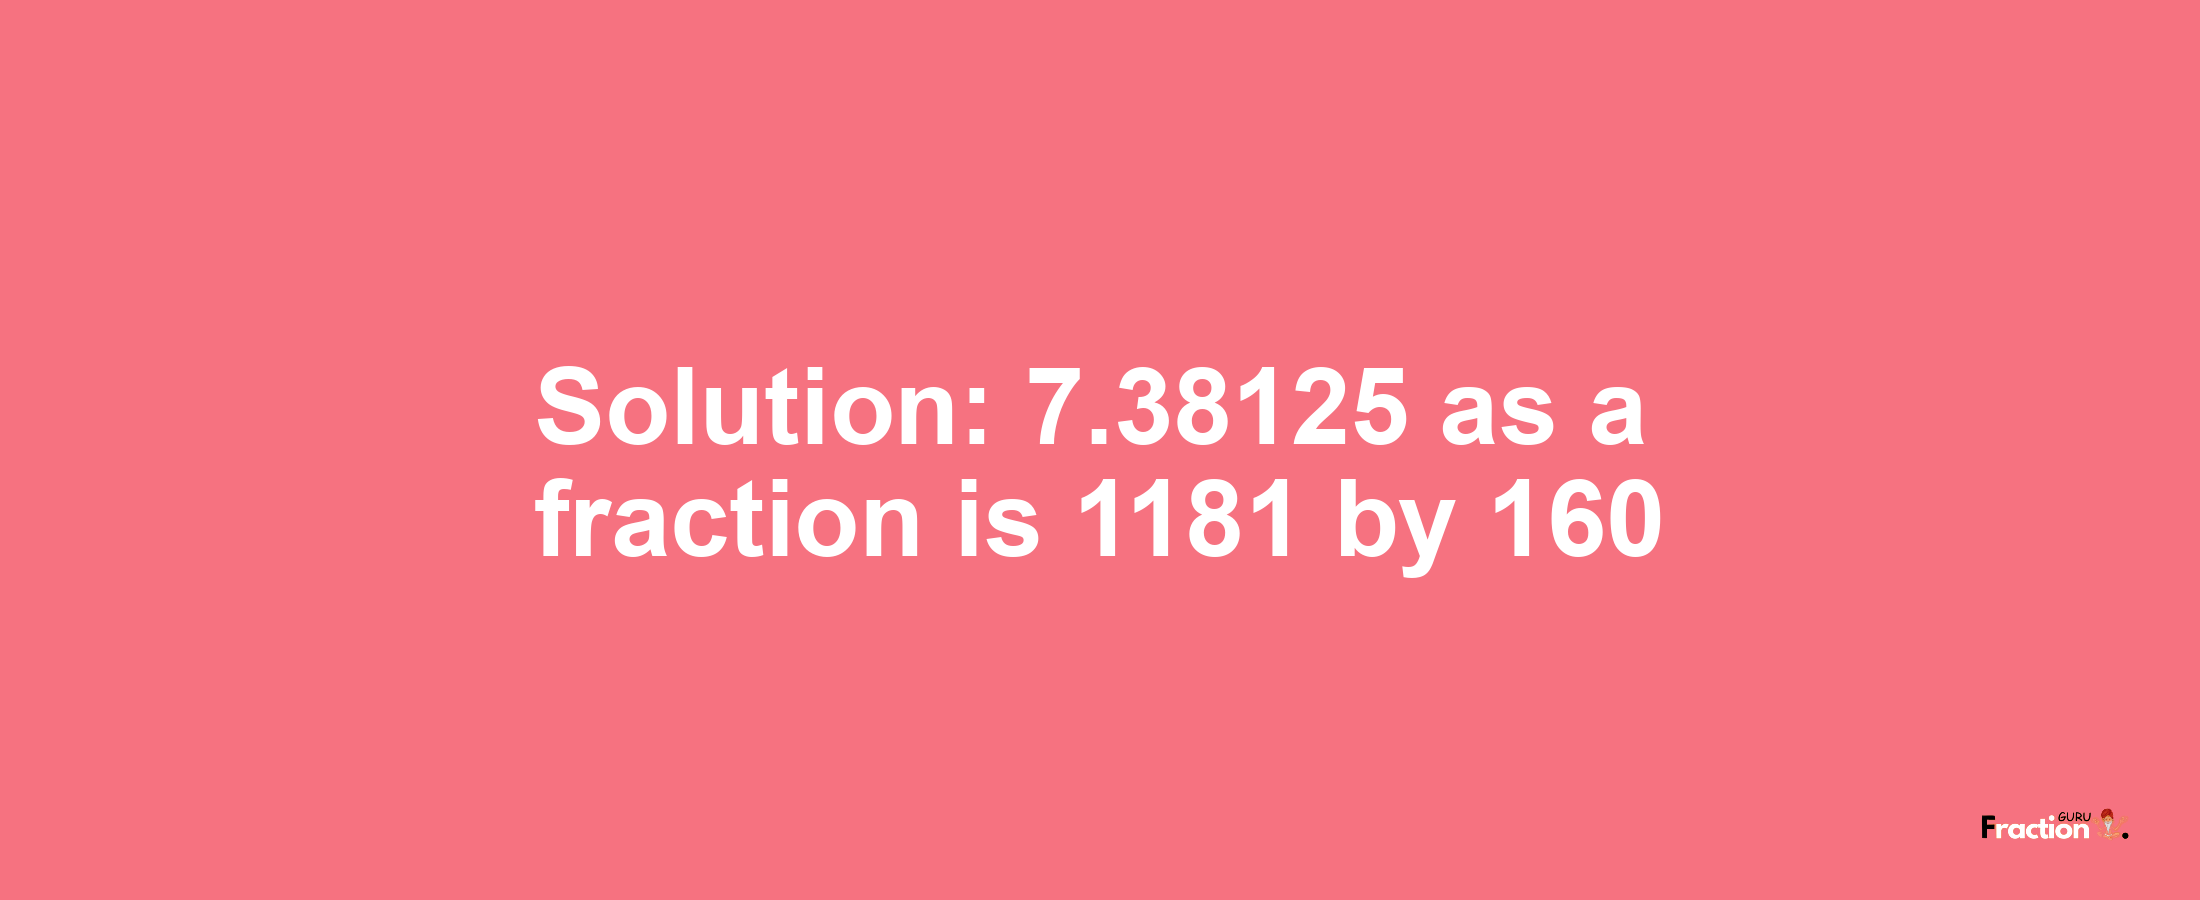 Solution:7.38125 as a fraction is 1181/160